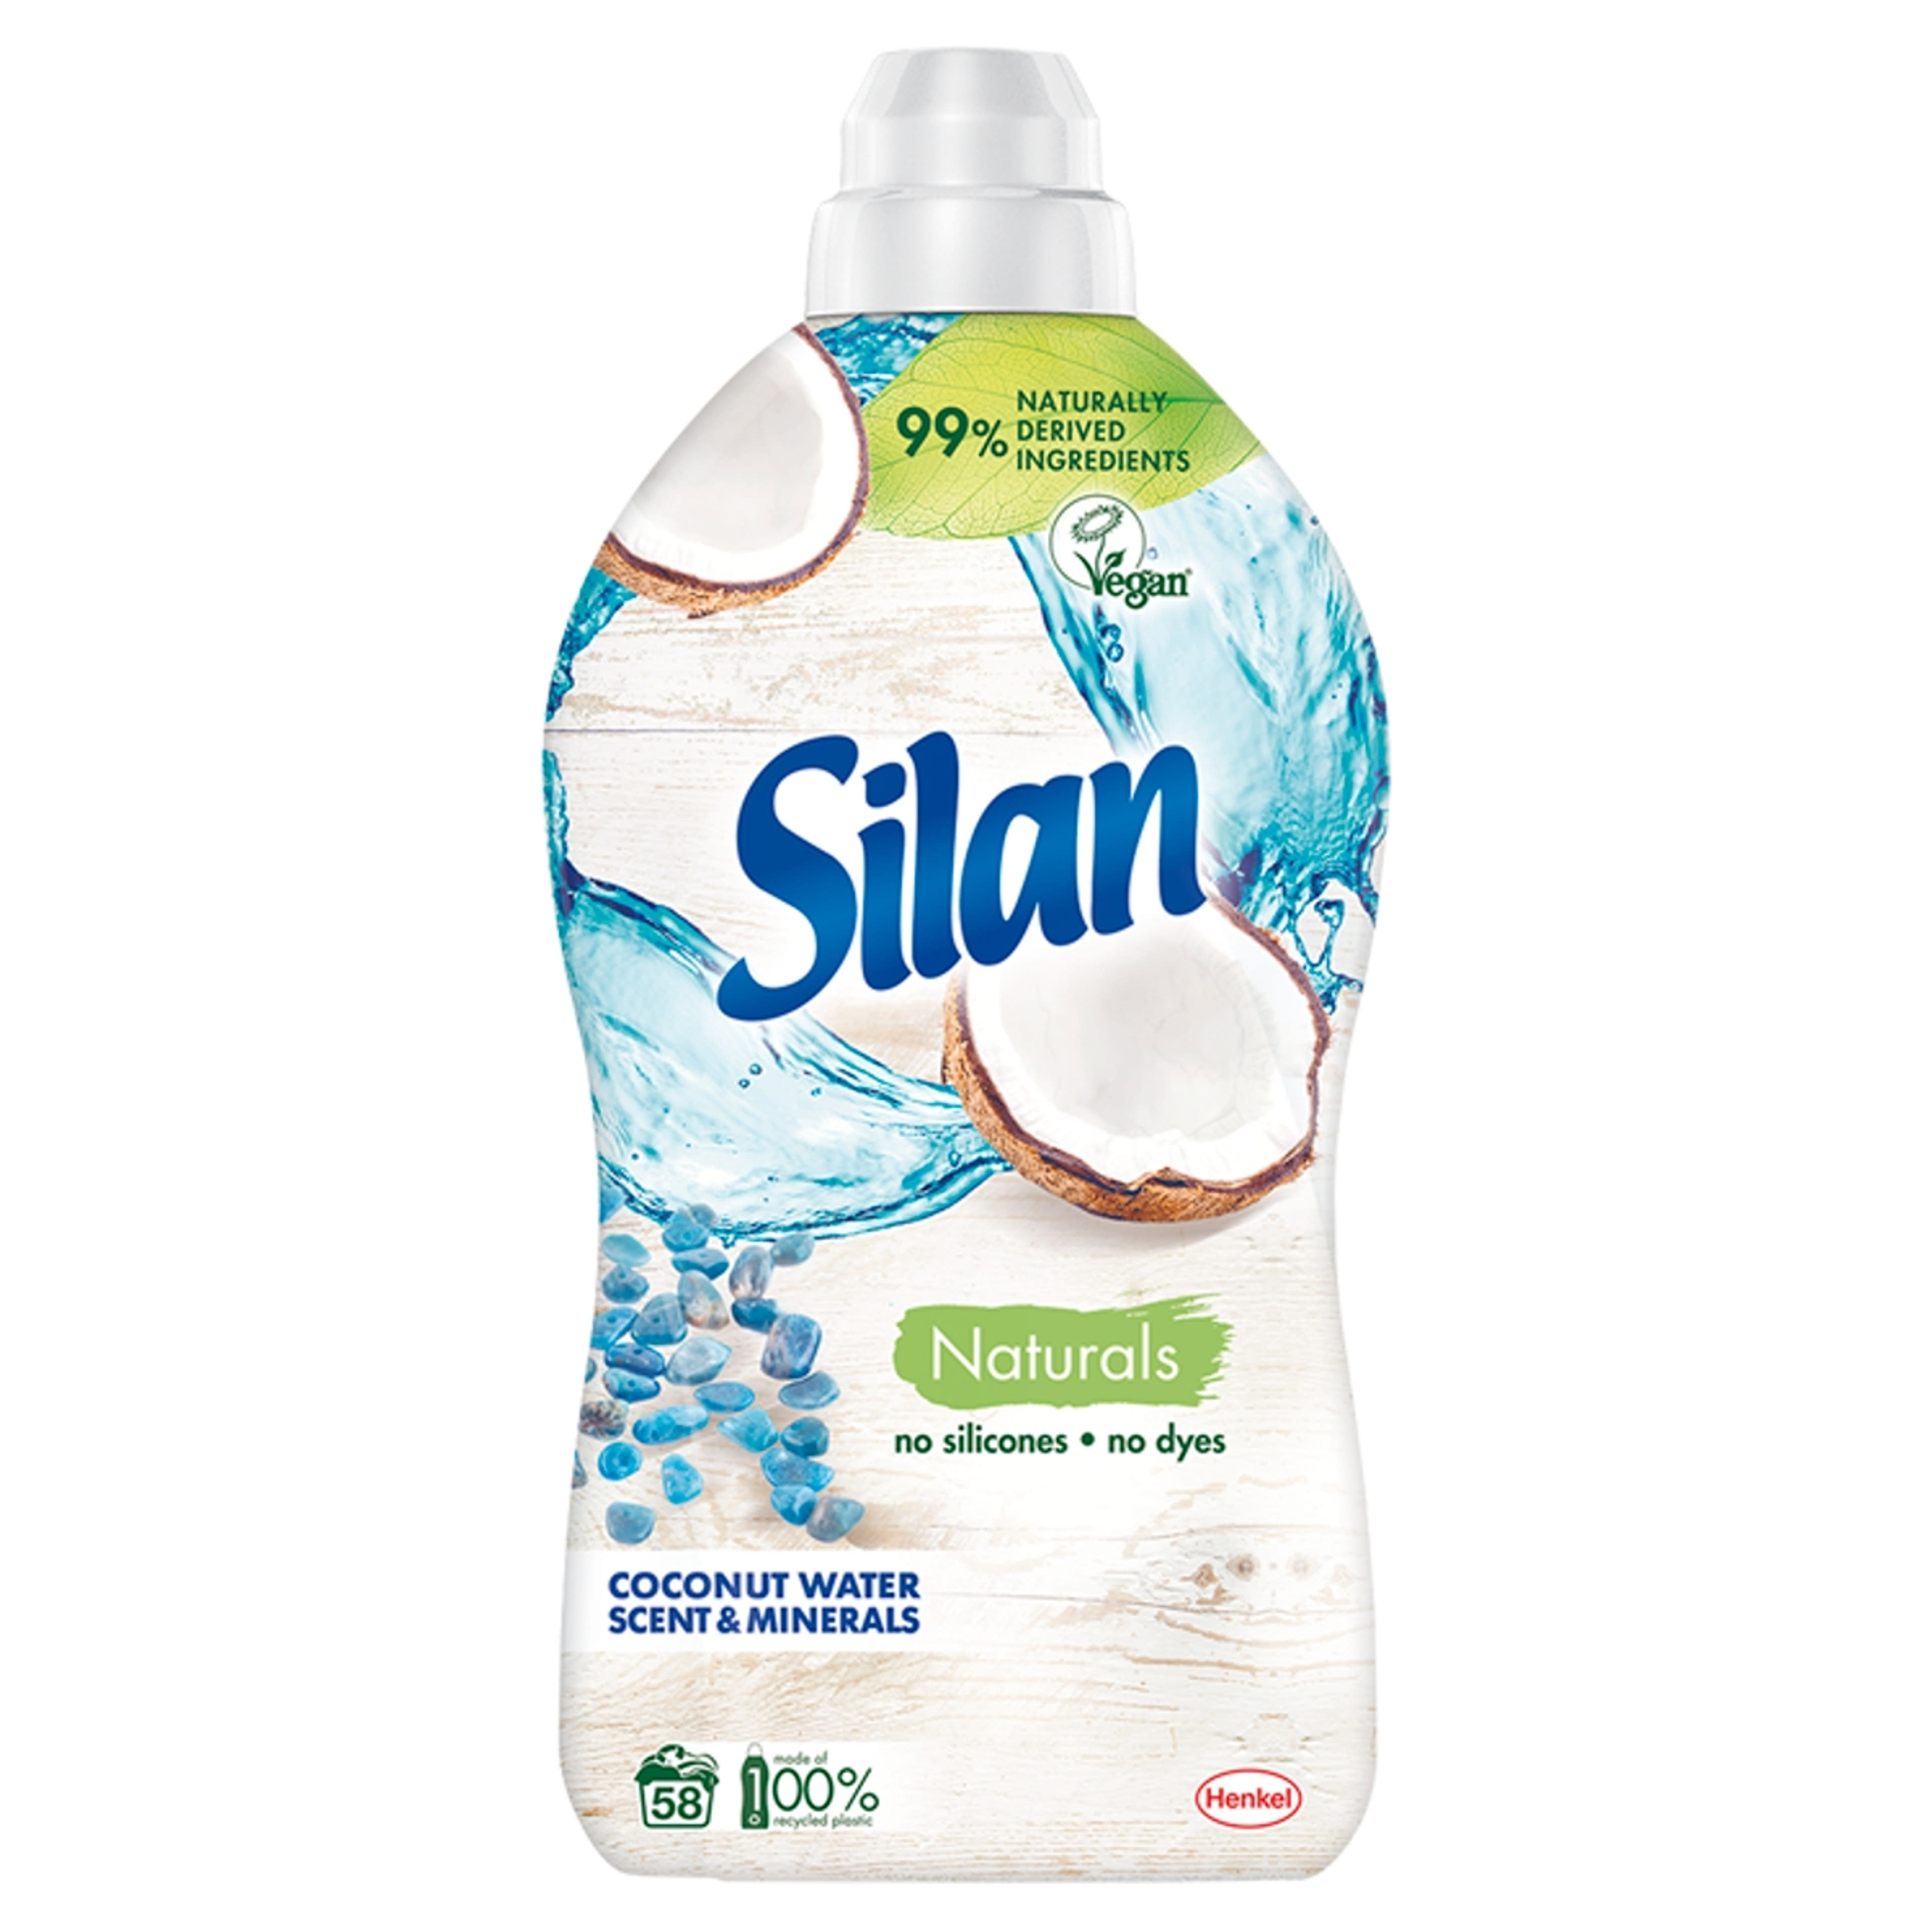 Silan aromatherapy coconut water scent - 1450 ml-1